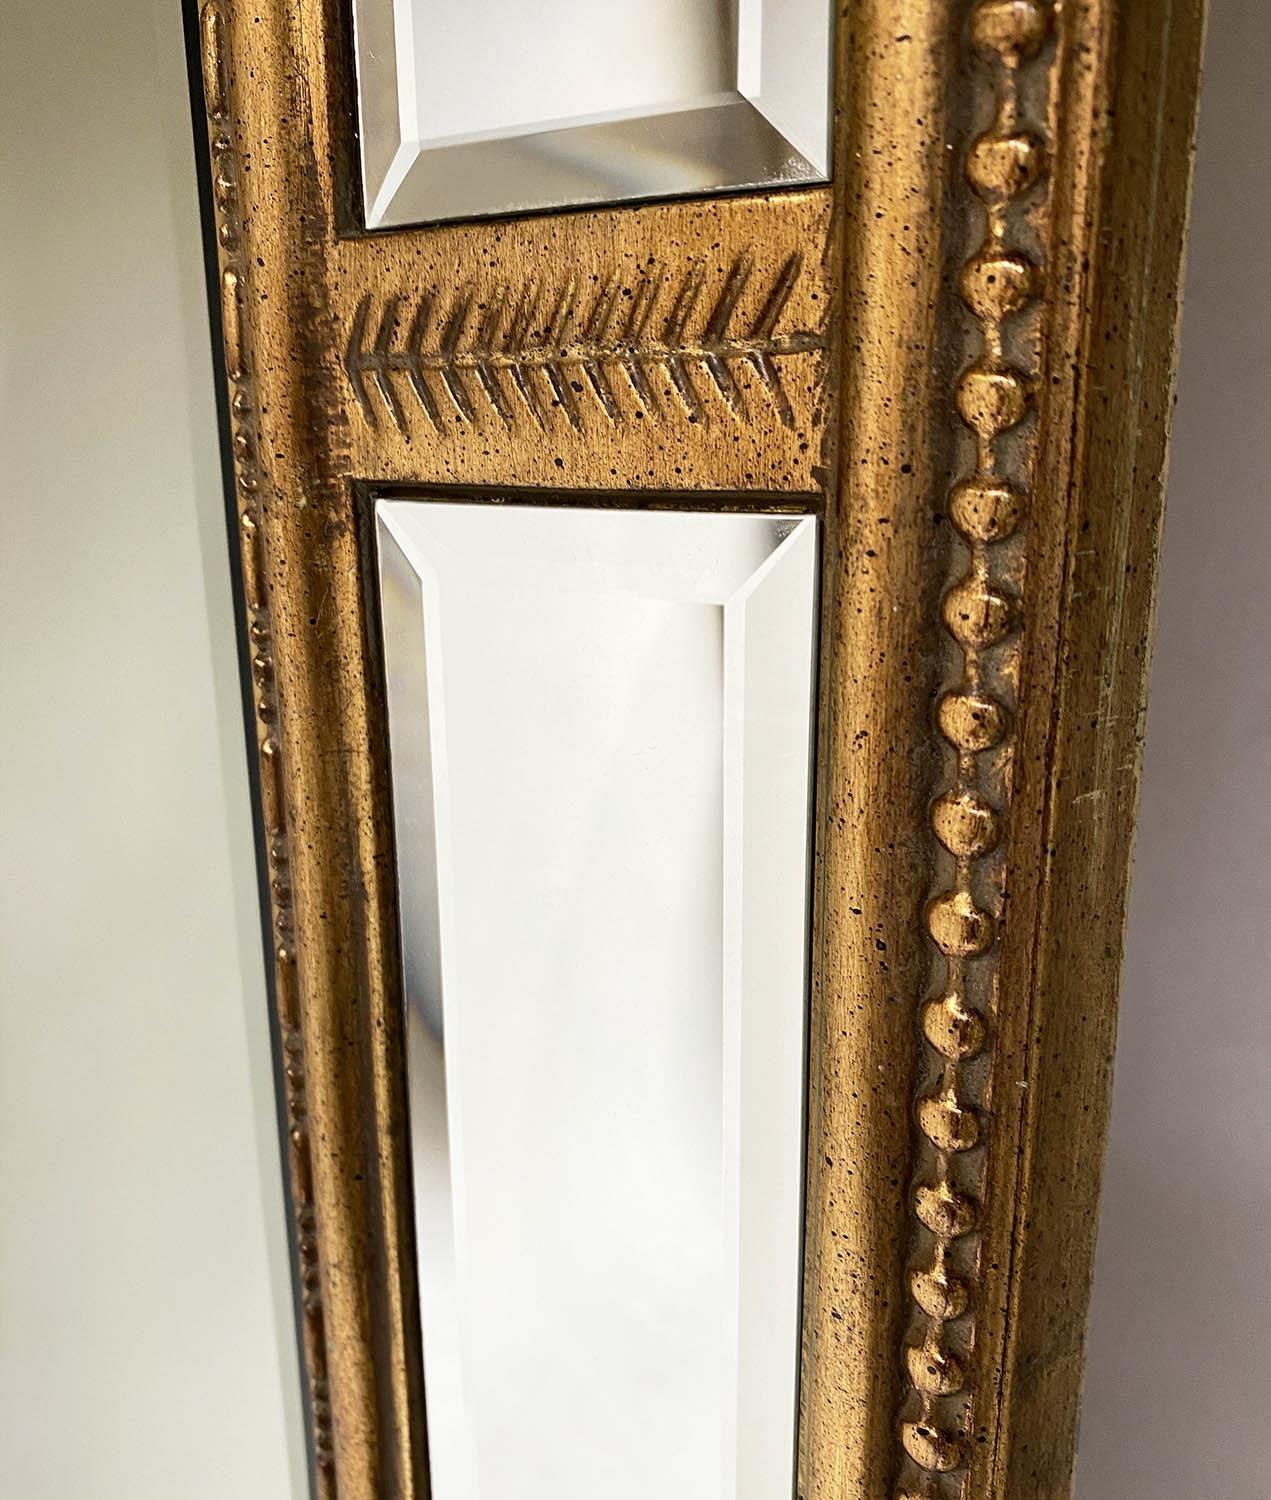 WALL MIRROR, Georgian style beaded giltwood with marginal and bevelled plates throughout, 193cm H - Image 2 of 4